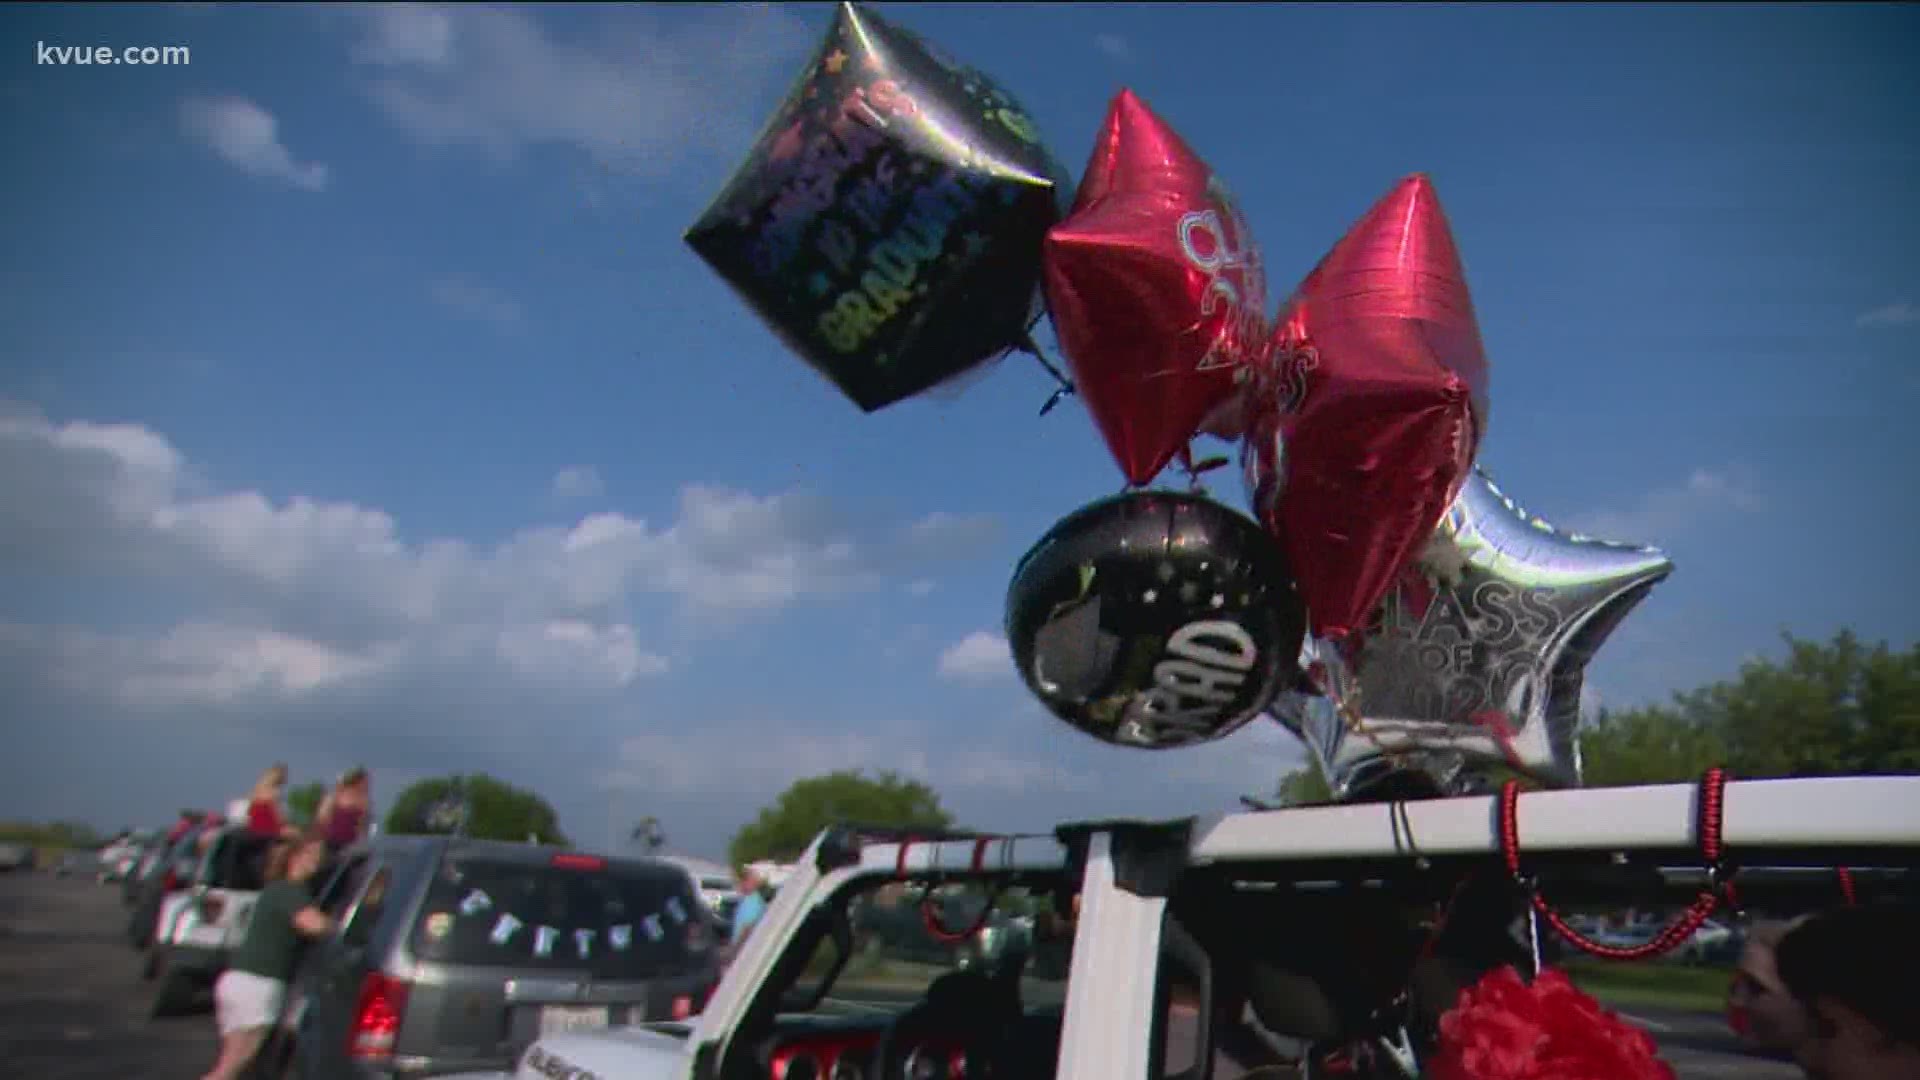 With their in-person graduation pushed back due to COVID-19, the parents of Lake Travis High School students organized a car parade to celebrate.